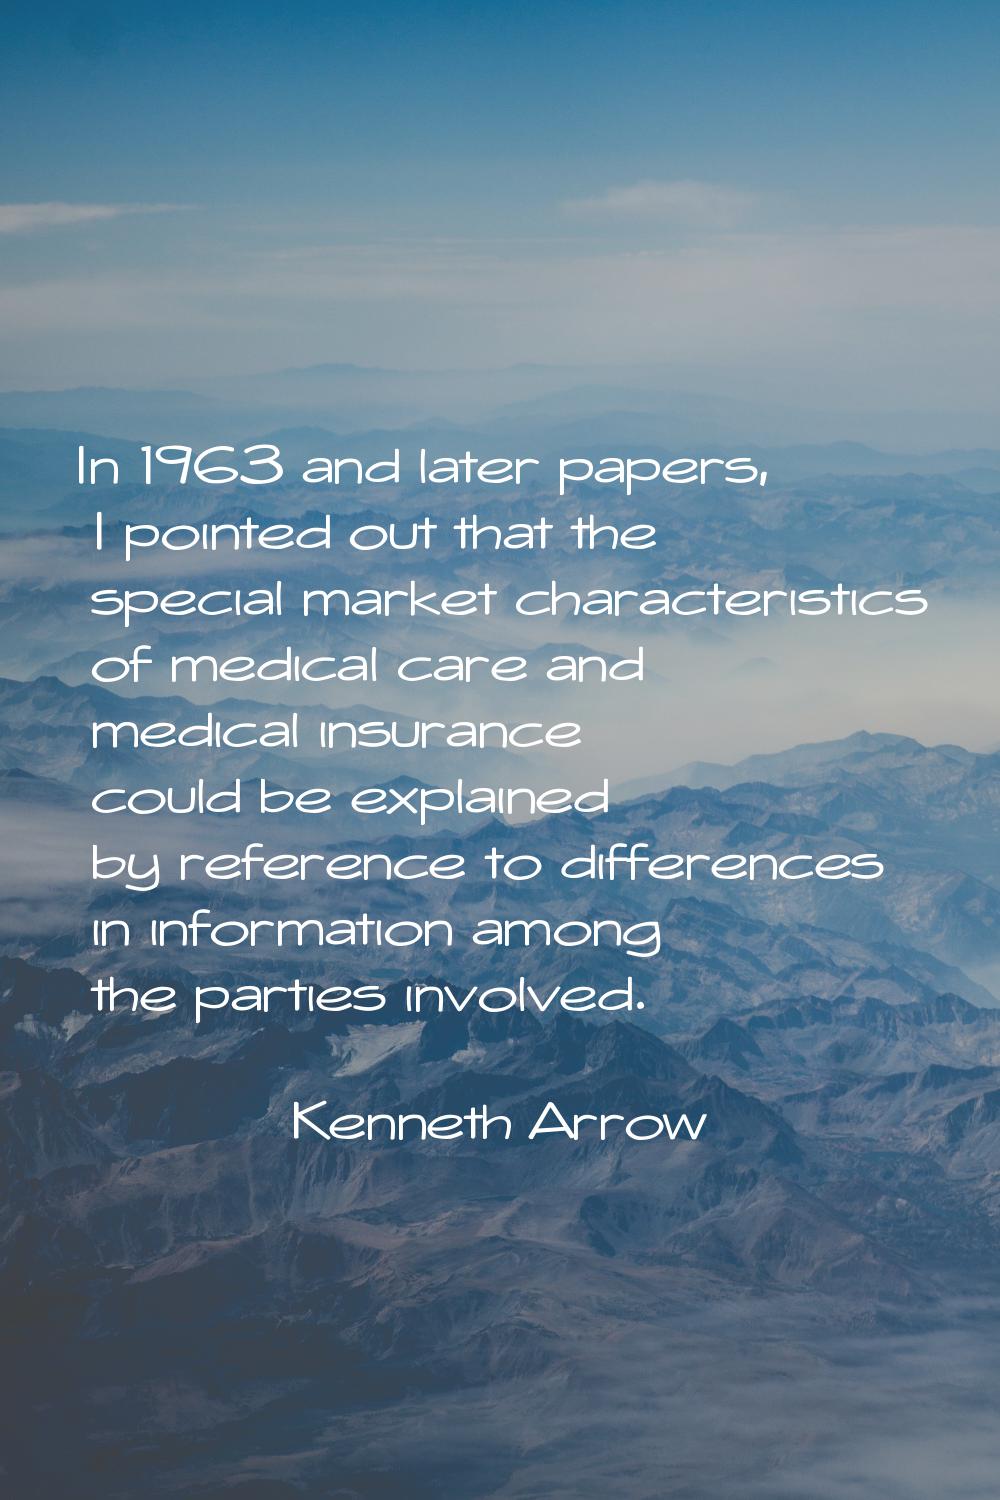 In 1963 and later papers, I pointed out that the special market characteristics of medical care and